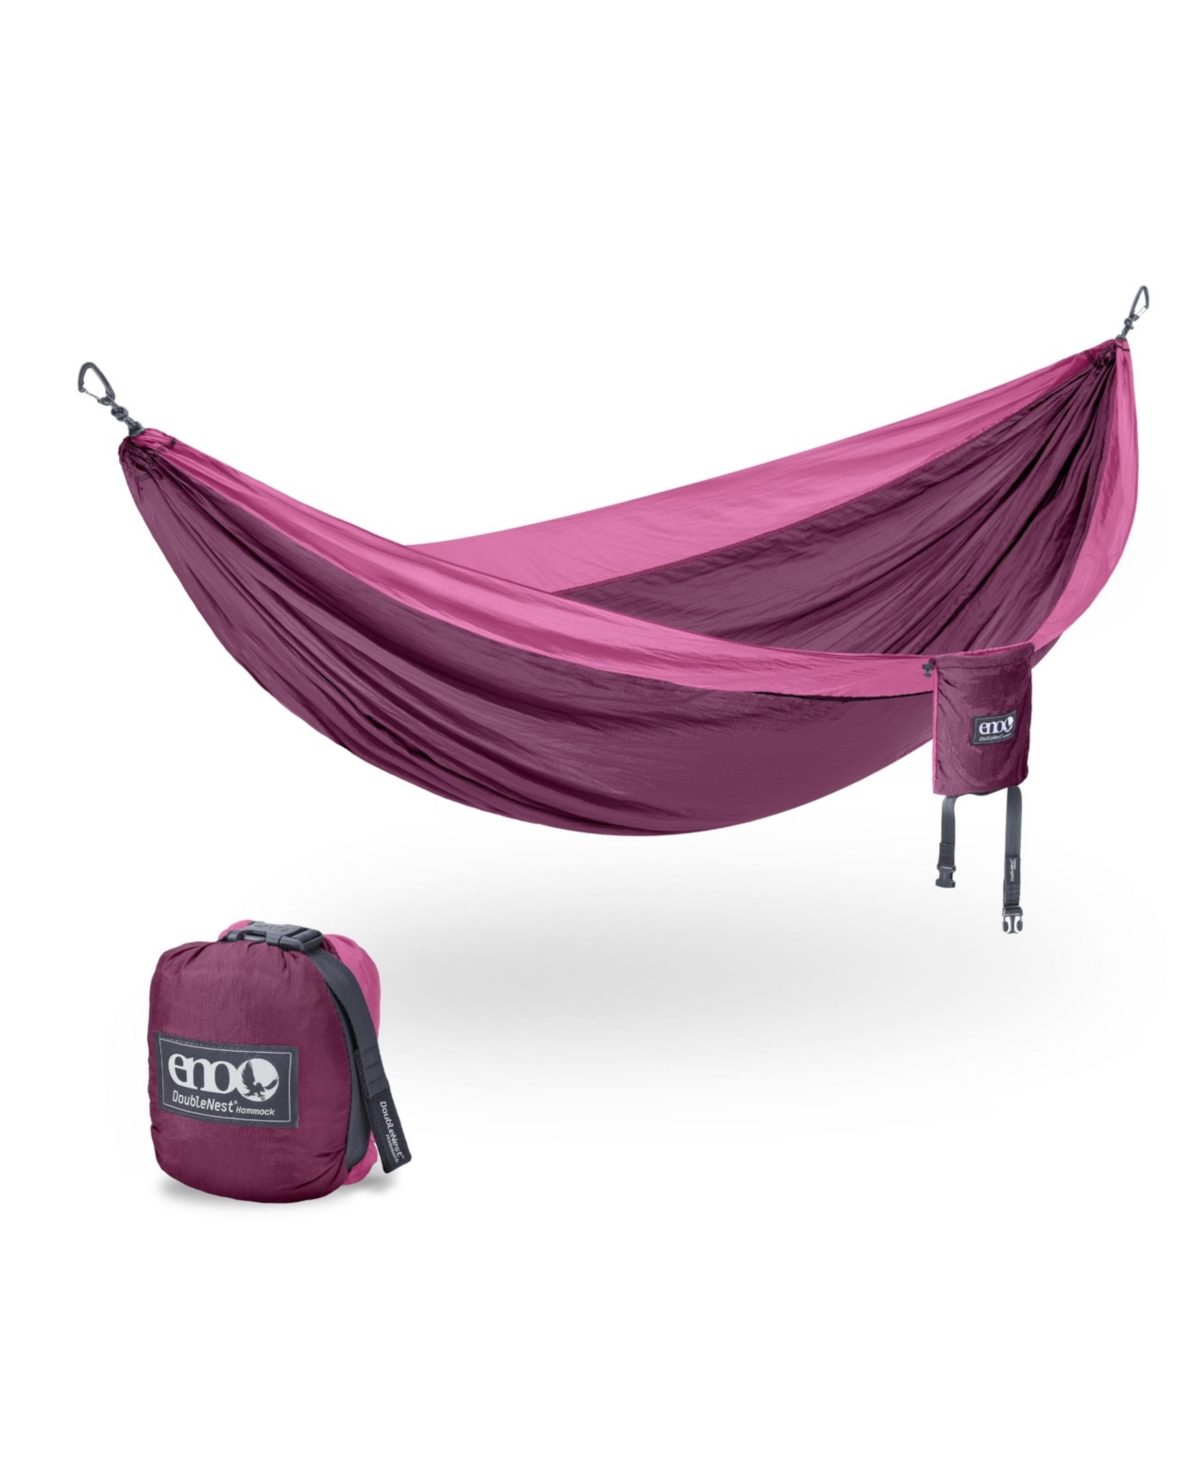 DoubleNest Hammock - Lightweight, Portable, 1 to 2 Person Hammock - For Camping, Hiking, Backpacking, Travel, a Festival, or the Beach - Plum/Berr